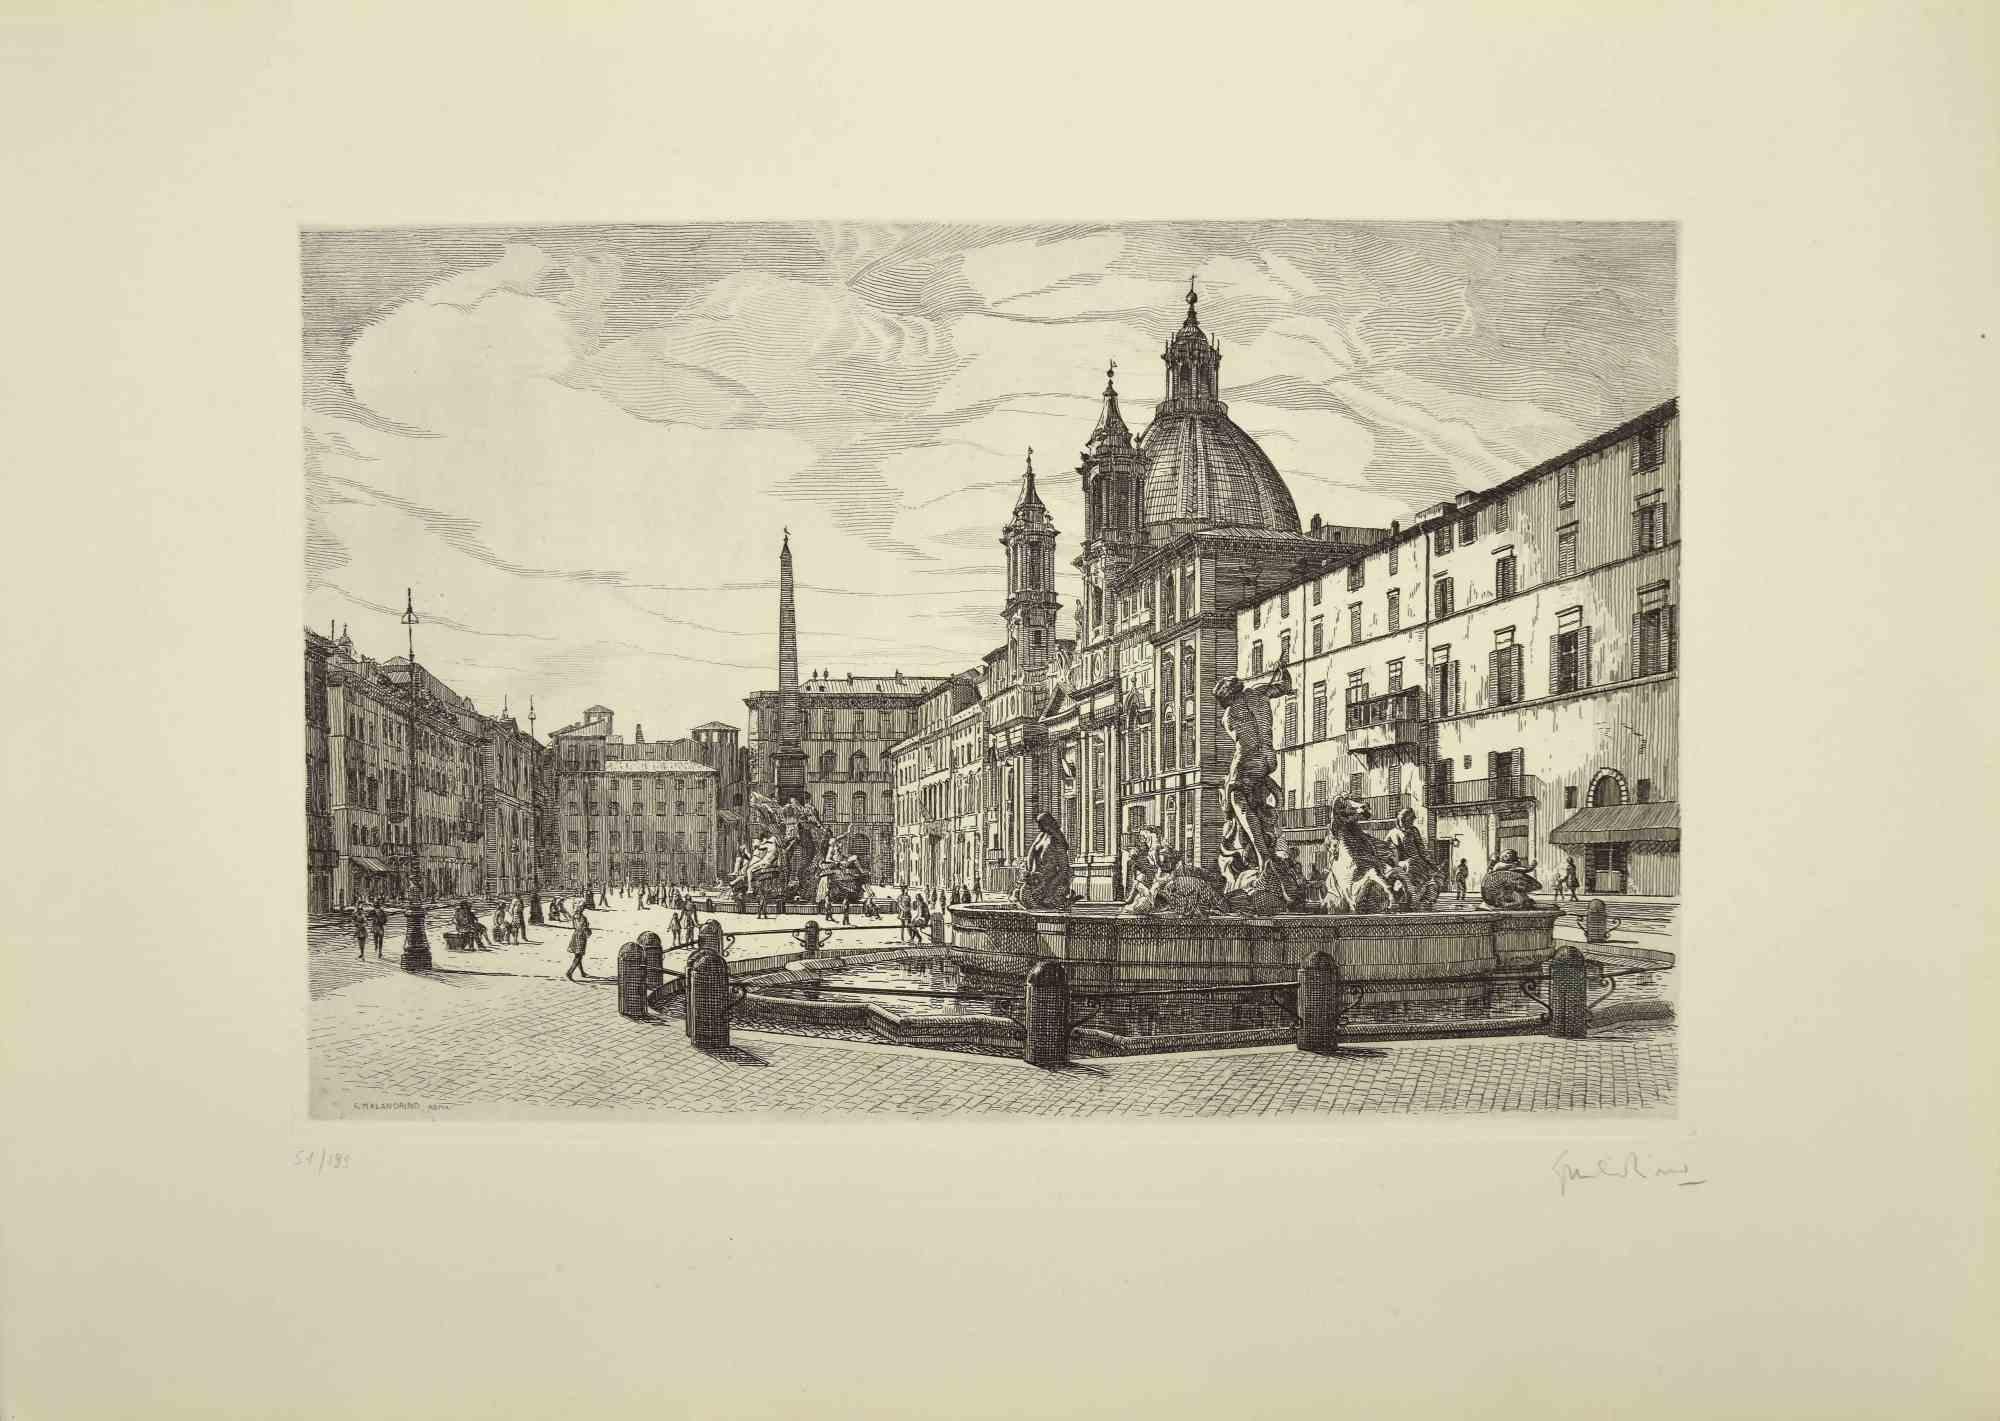 View of Piazza Navona  is an original contemporary artwork realized in 1970 by the Italian artist  Giuseppe Malandrino  (Modica, 1910 - Rome, 1979).
 
Etching on cardboard.
 
Hand-signed  in pencil on the lower right corner.  Numbered  on the lower